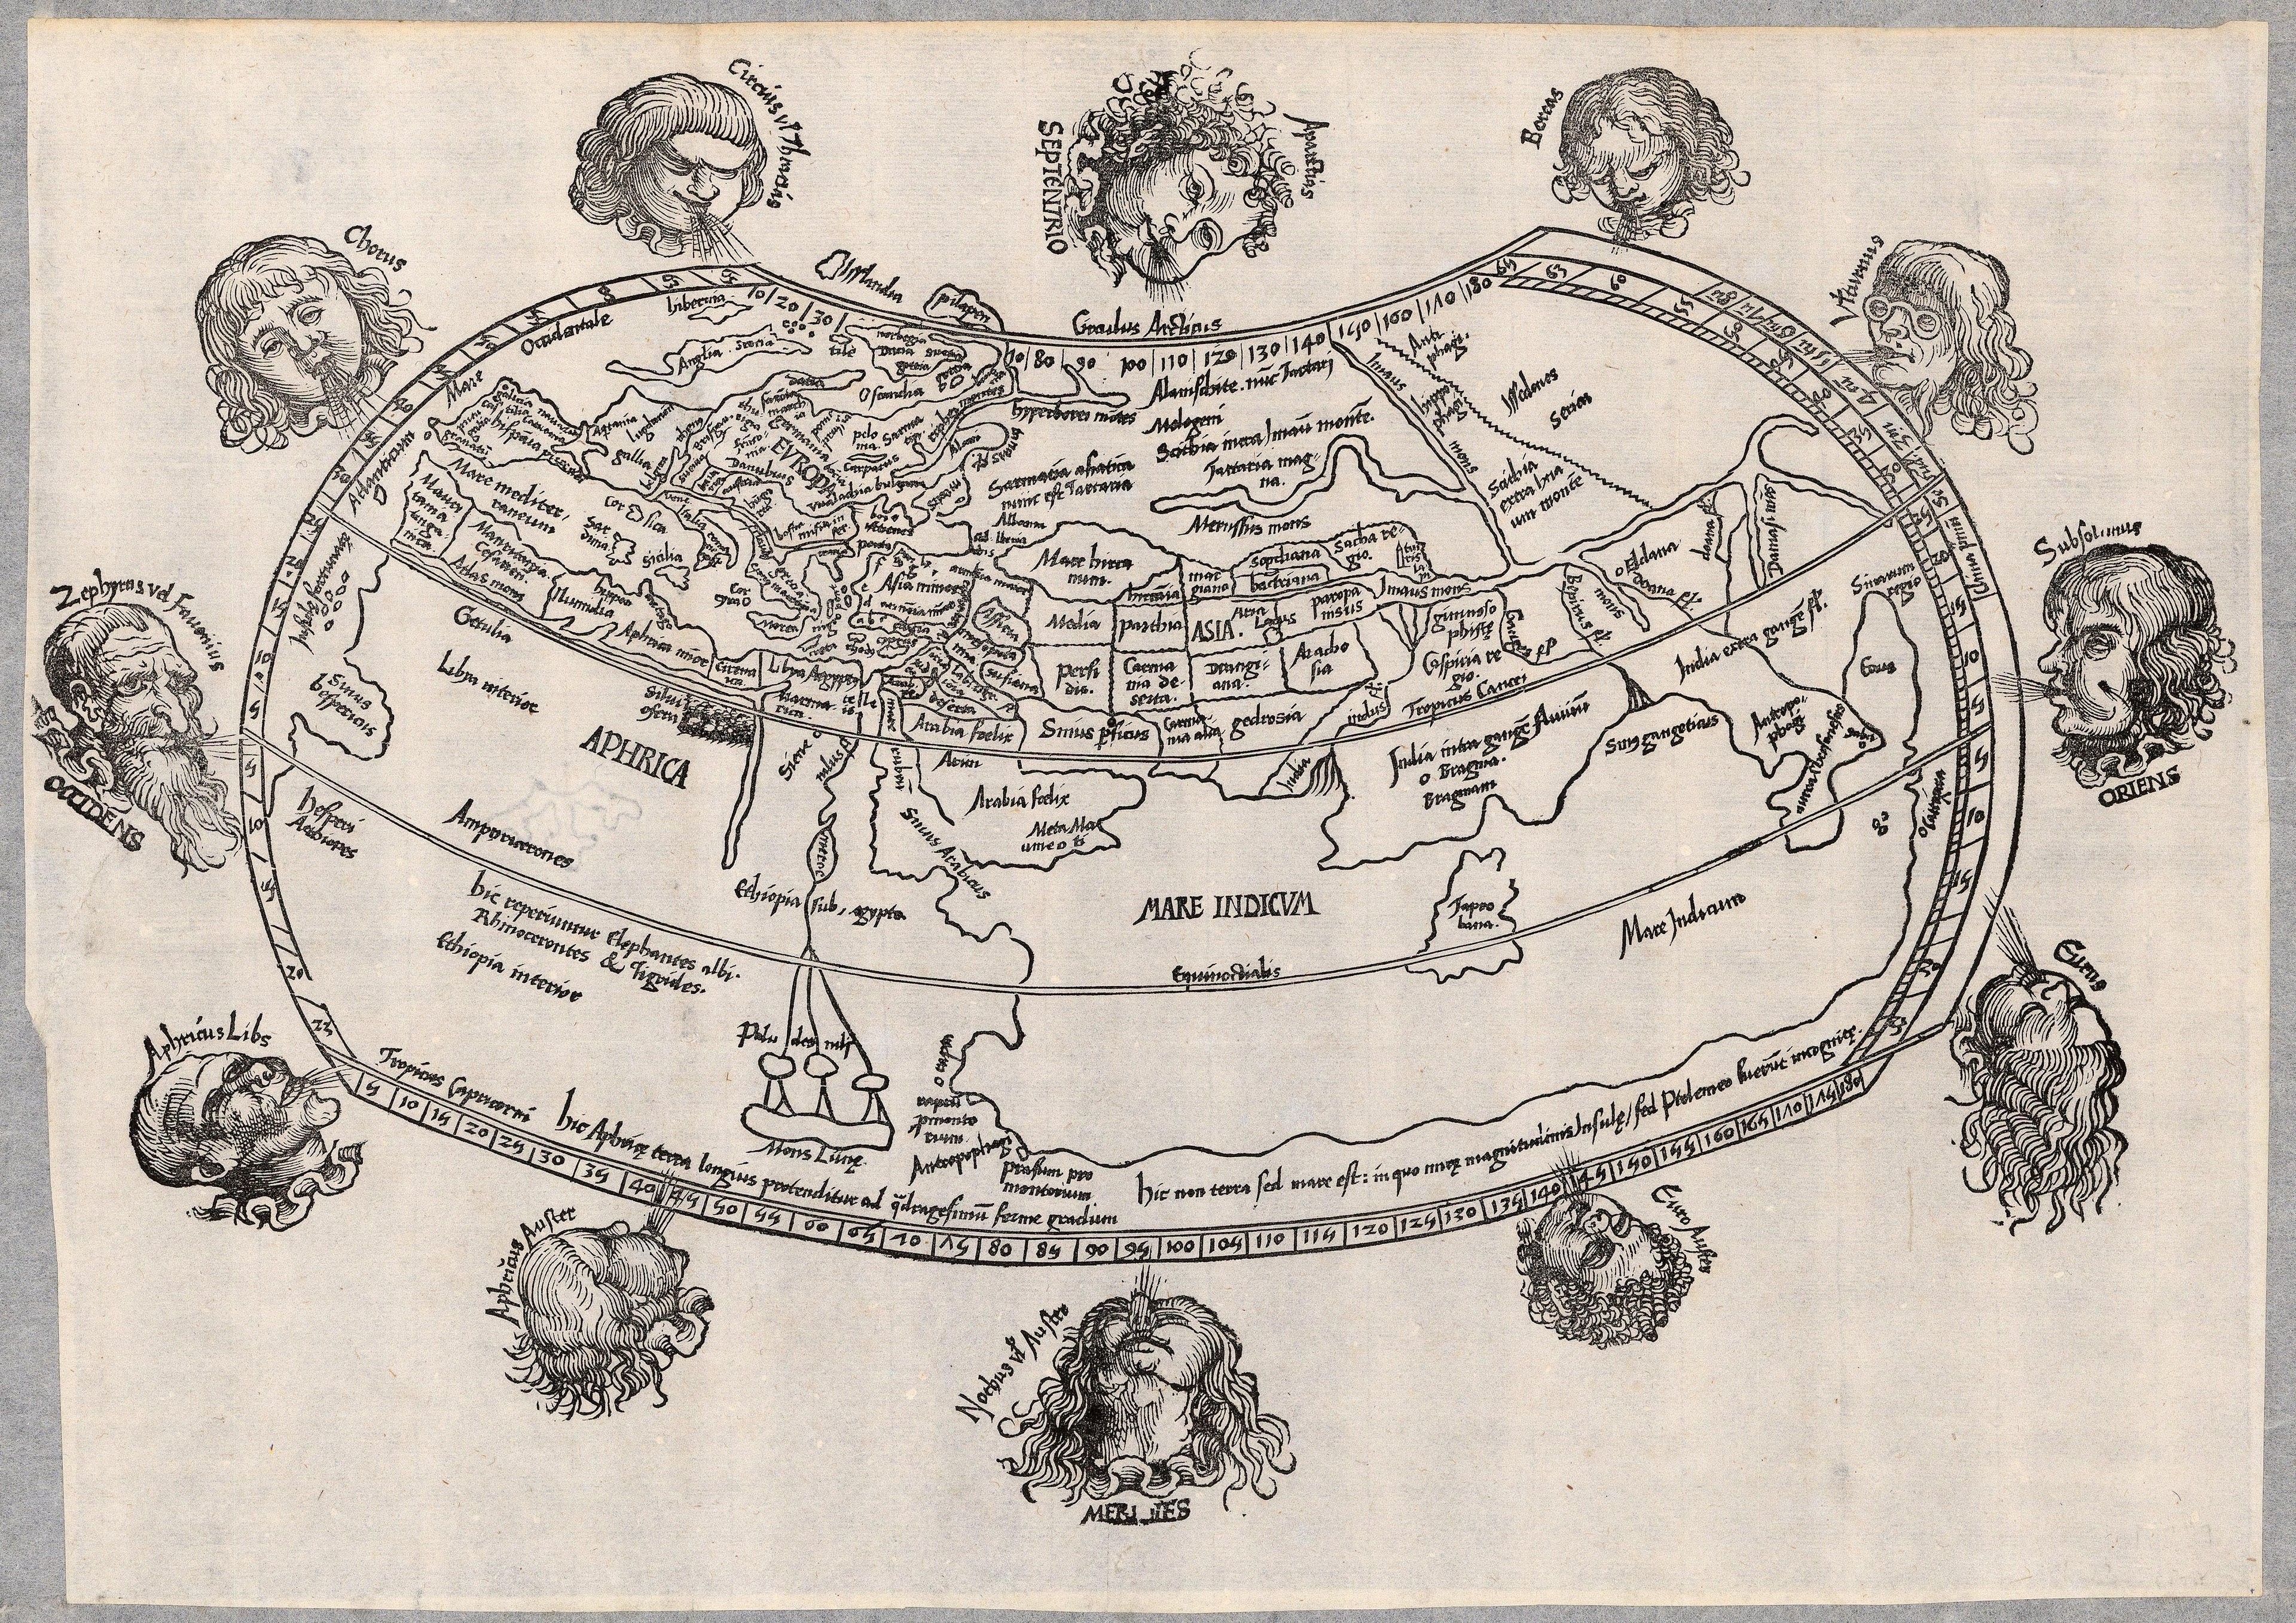 A black and white engraving of a world map on a Ptolemaic projection, showing the known extent of the earth in a lozenge shape, and surrounded by windheads